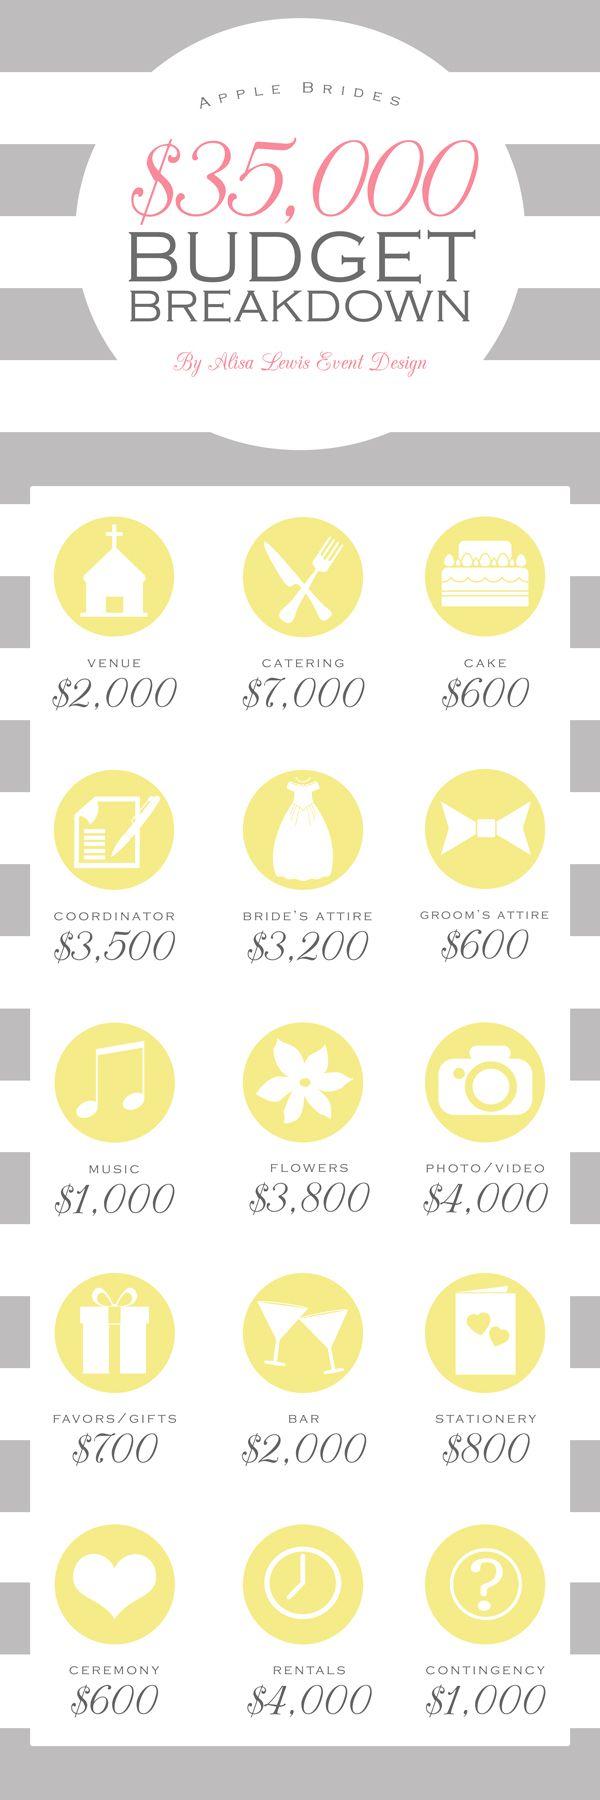 Mariage - Budget Breakdown For A $35,000 Wedding